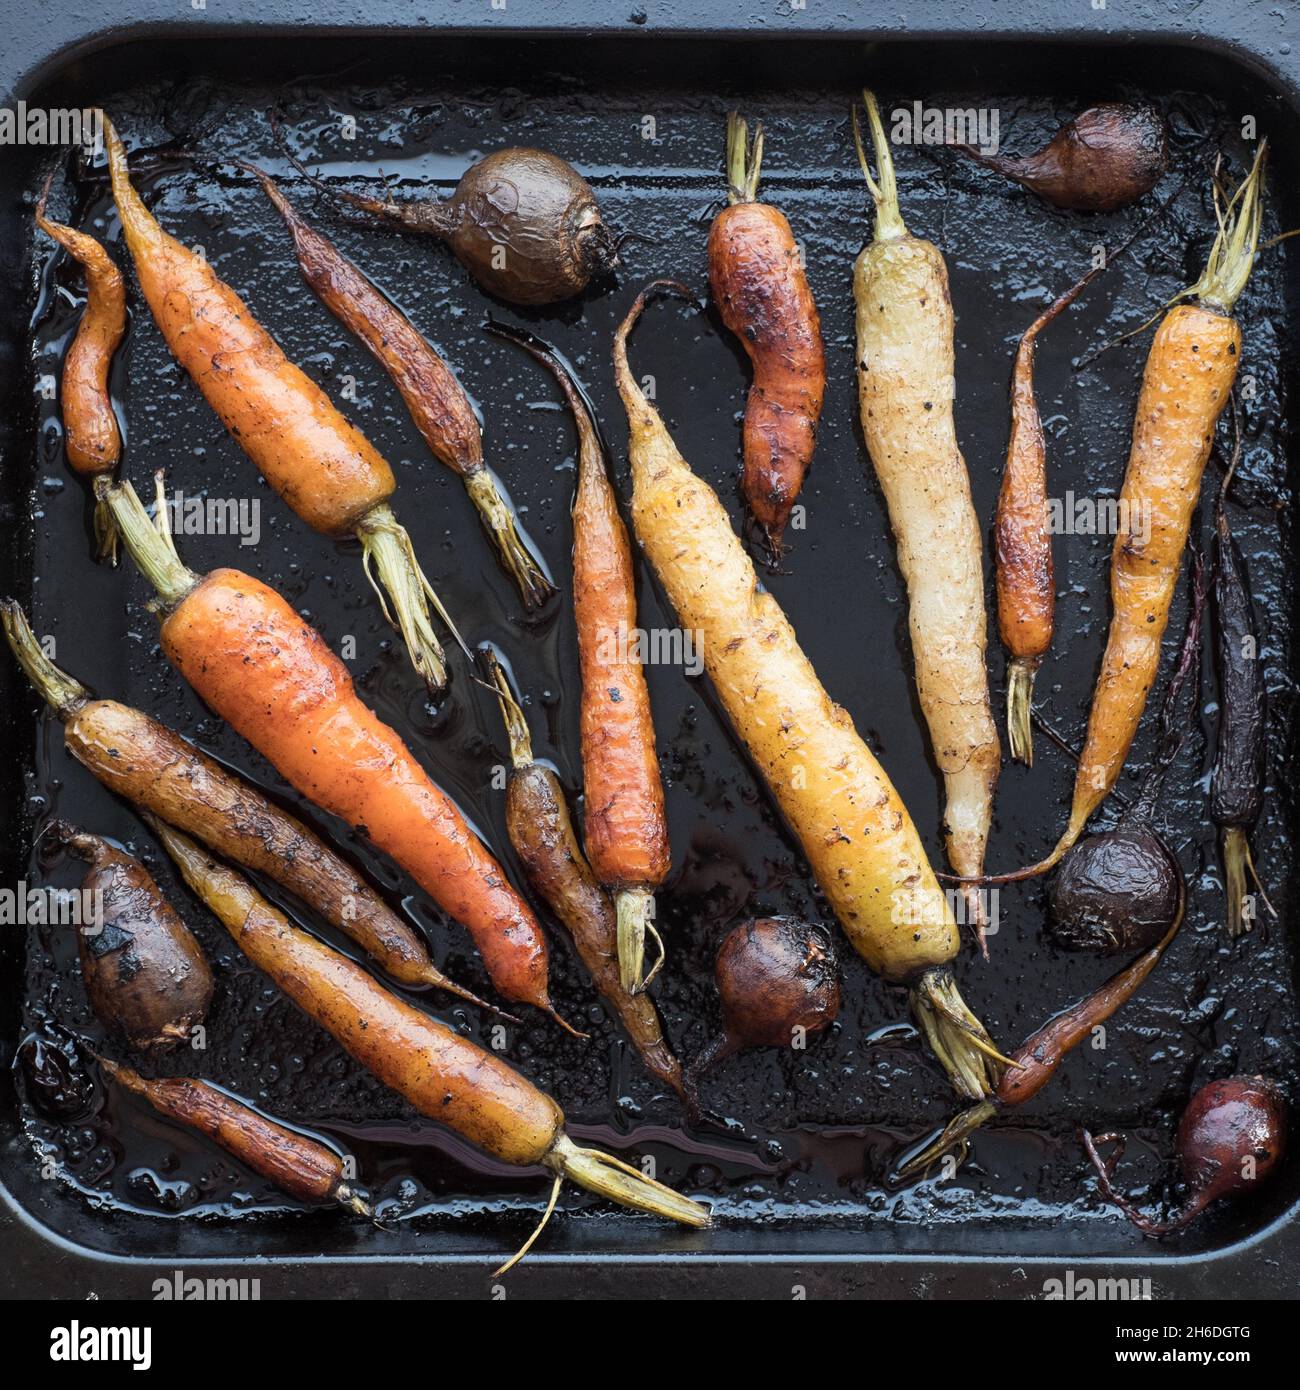 Roasted root vegetables Stock Photo